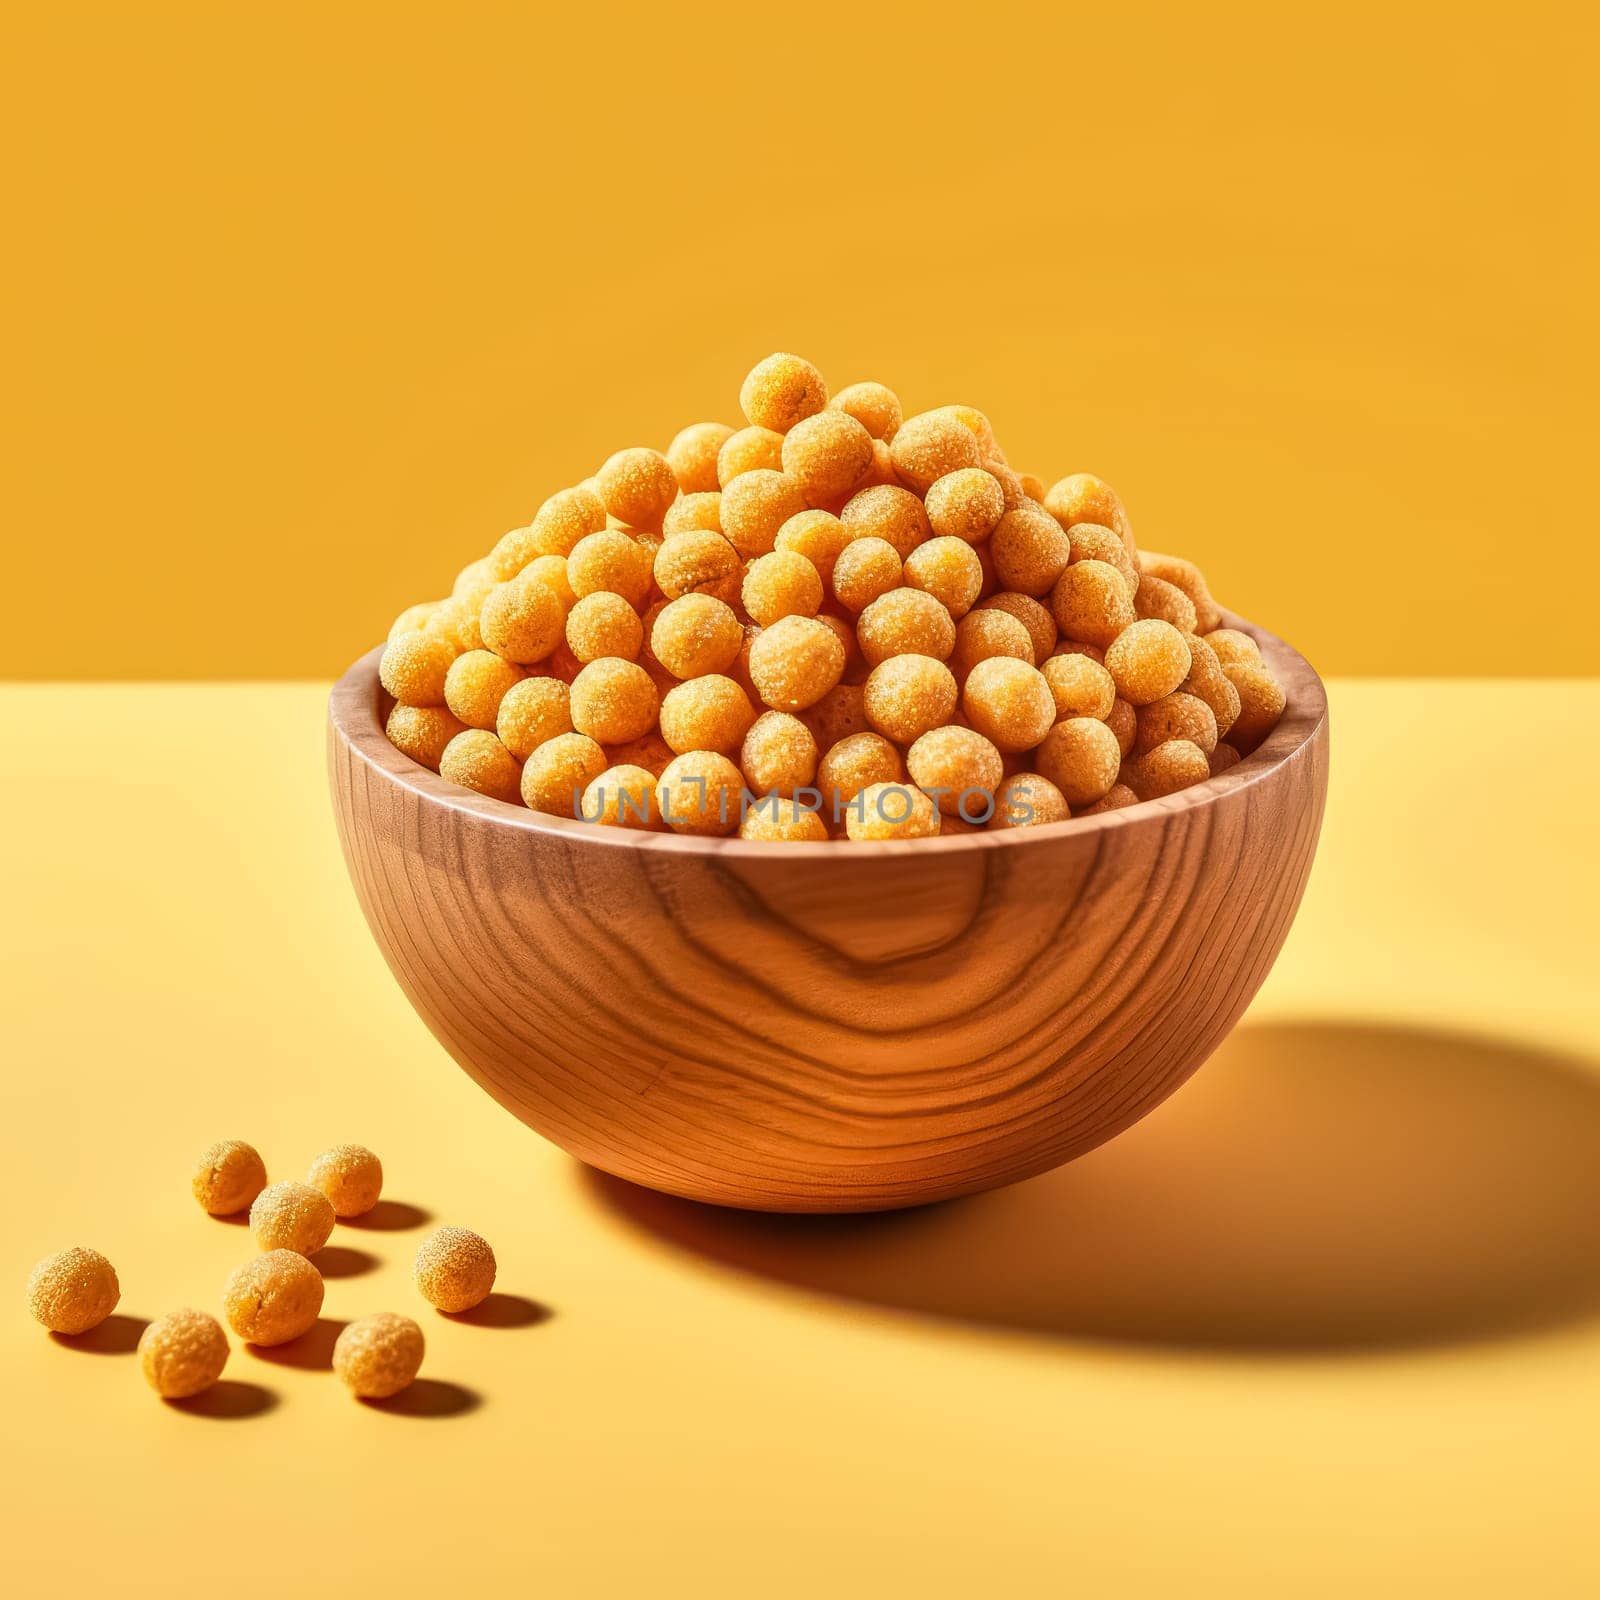 Vibrant and delicious, corn balls pop on a colorful backdrop a cheerful portrayal of breakfast cereal delights